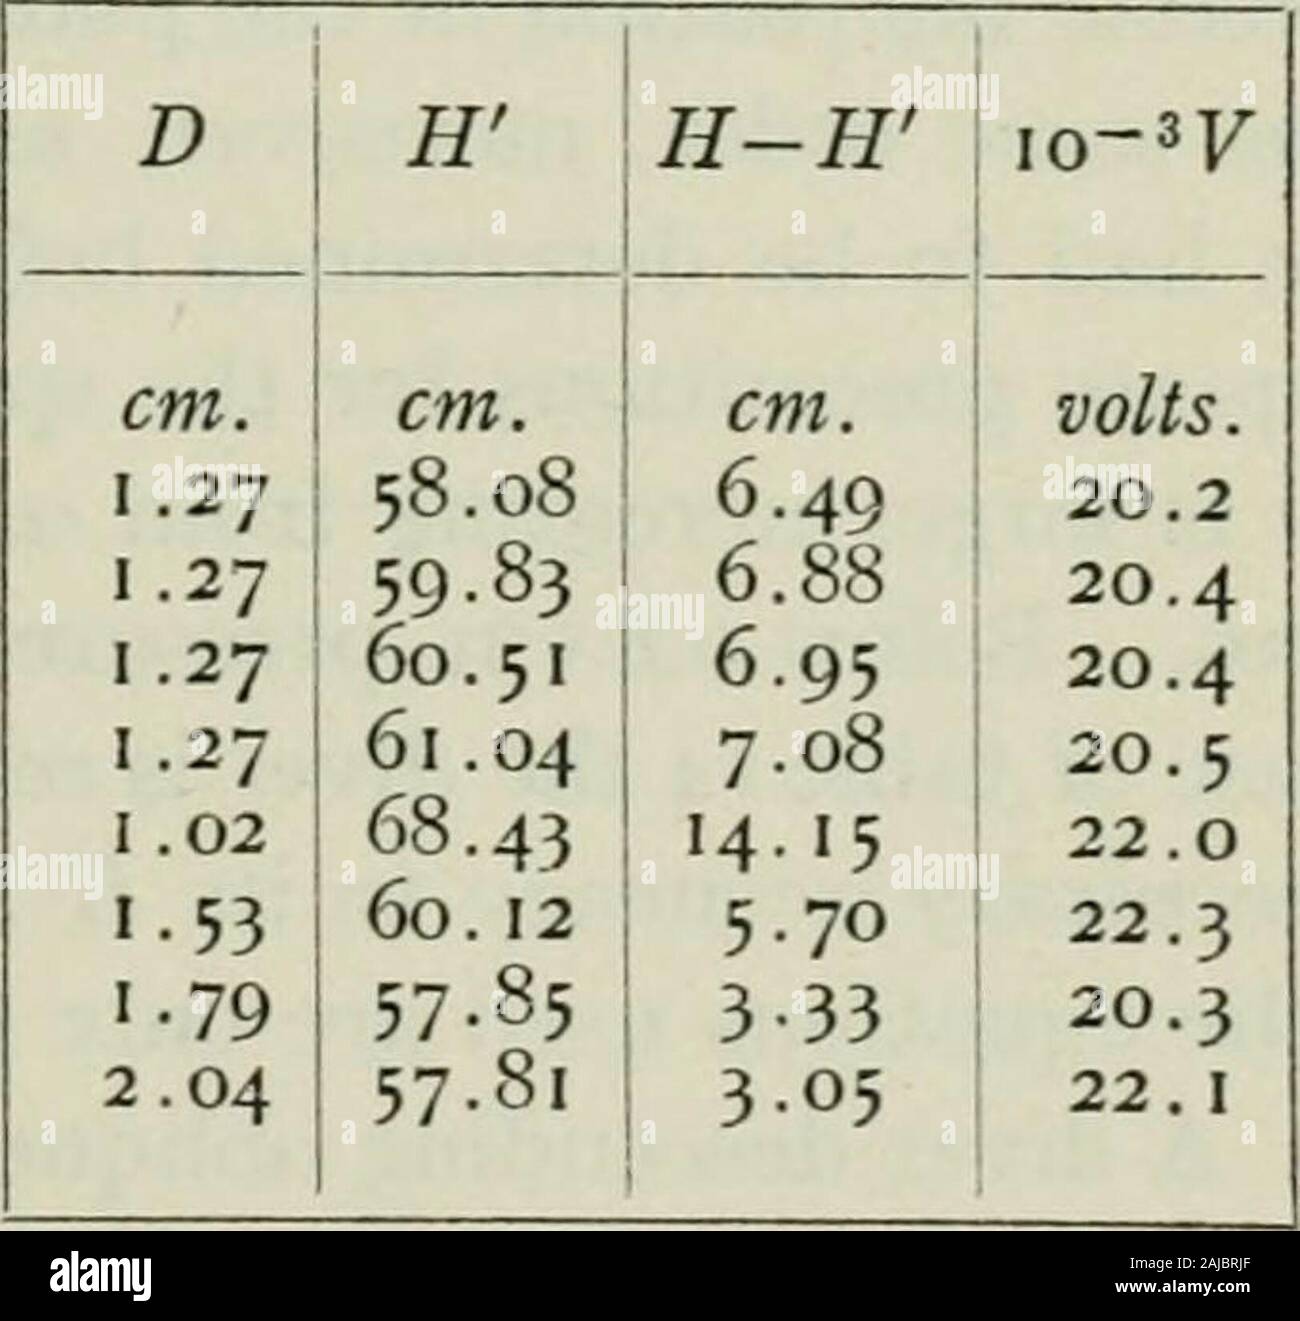 The diffusion of gases through liquids and allied experiments . h which the charged diver breaks off beingspecially marked. Care must be taken to decrease pressure slowly in orderto avoid thermal discrepancies. Table 13, part lY, is an example of thedata obtained. I.—il/=35 gramsameter. Kerosene oil,p = o.799 at24.Barometer, 76.14 at 17°. Diameterof diver tube, 3.85 cm.;length, 8.8 cm. Table 13.—^Measurement of potential. Disk, 3.5 cm. in di- III.—il/= 31.98 grams. Diameter, 2i? =5.0 cm.; length, 6 cm.; slightly top-heavy. D H H-H I0-3F D H H-H 10-37 cm. cm. cm. volts. cm. cm. cm. volts. 0.32 Stock Photo